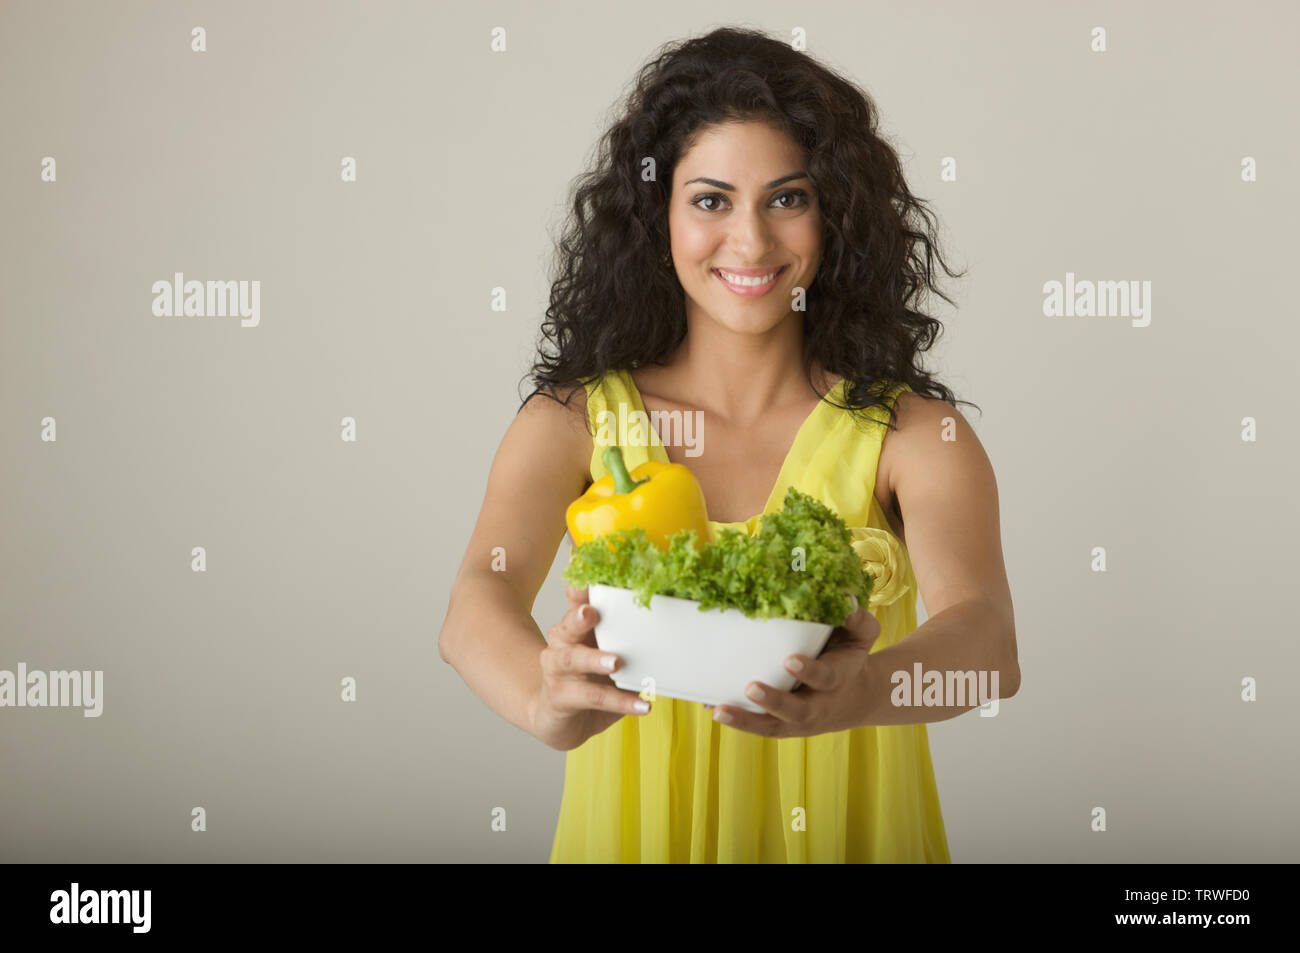 Woman holding a bowl of vegetables and smiling Stock Photo